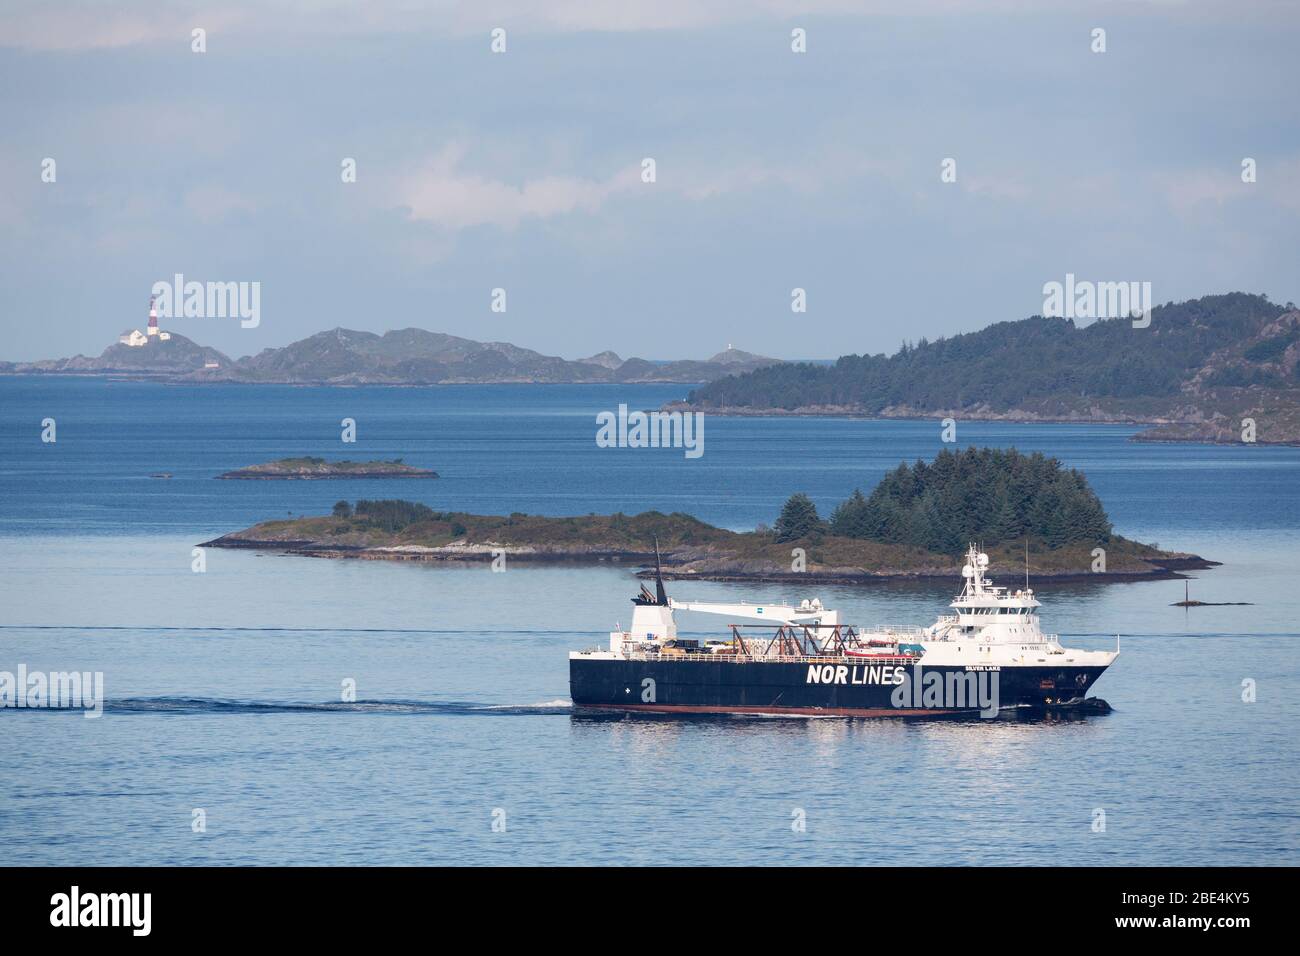 The Nor Lines' vessel Silver Lake off Florø. Stock Photo